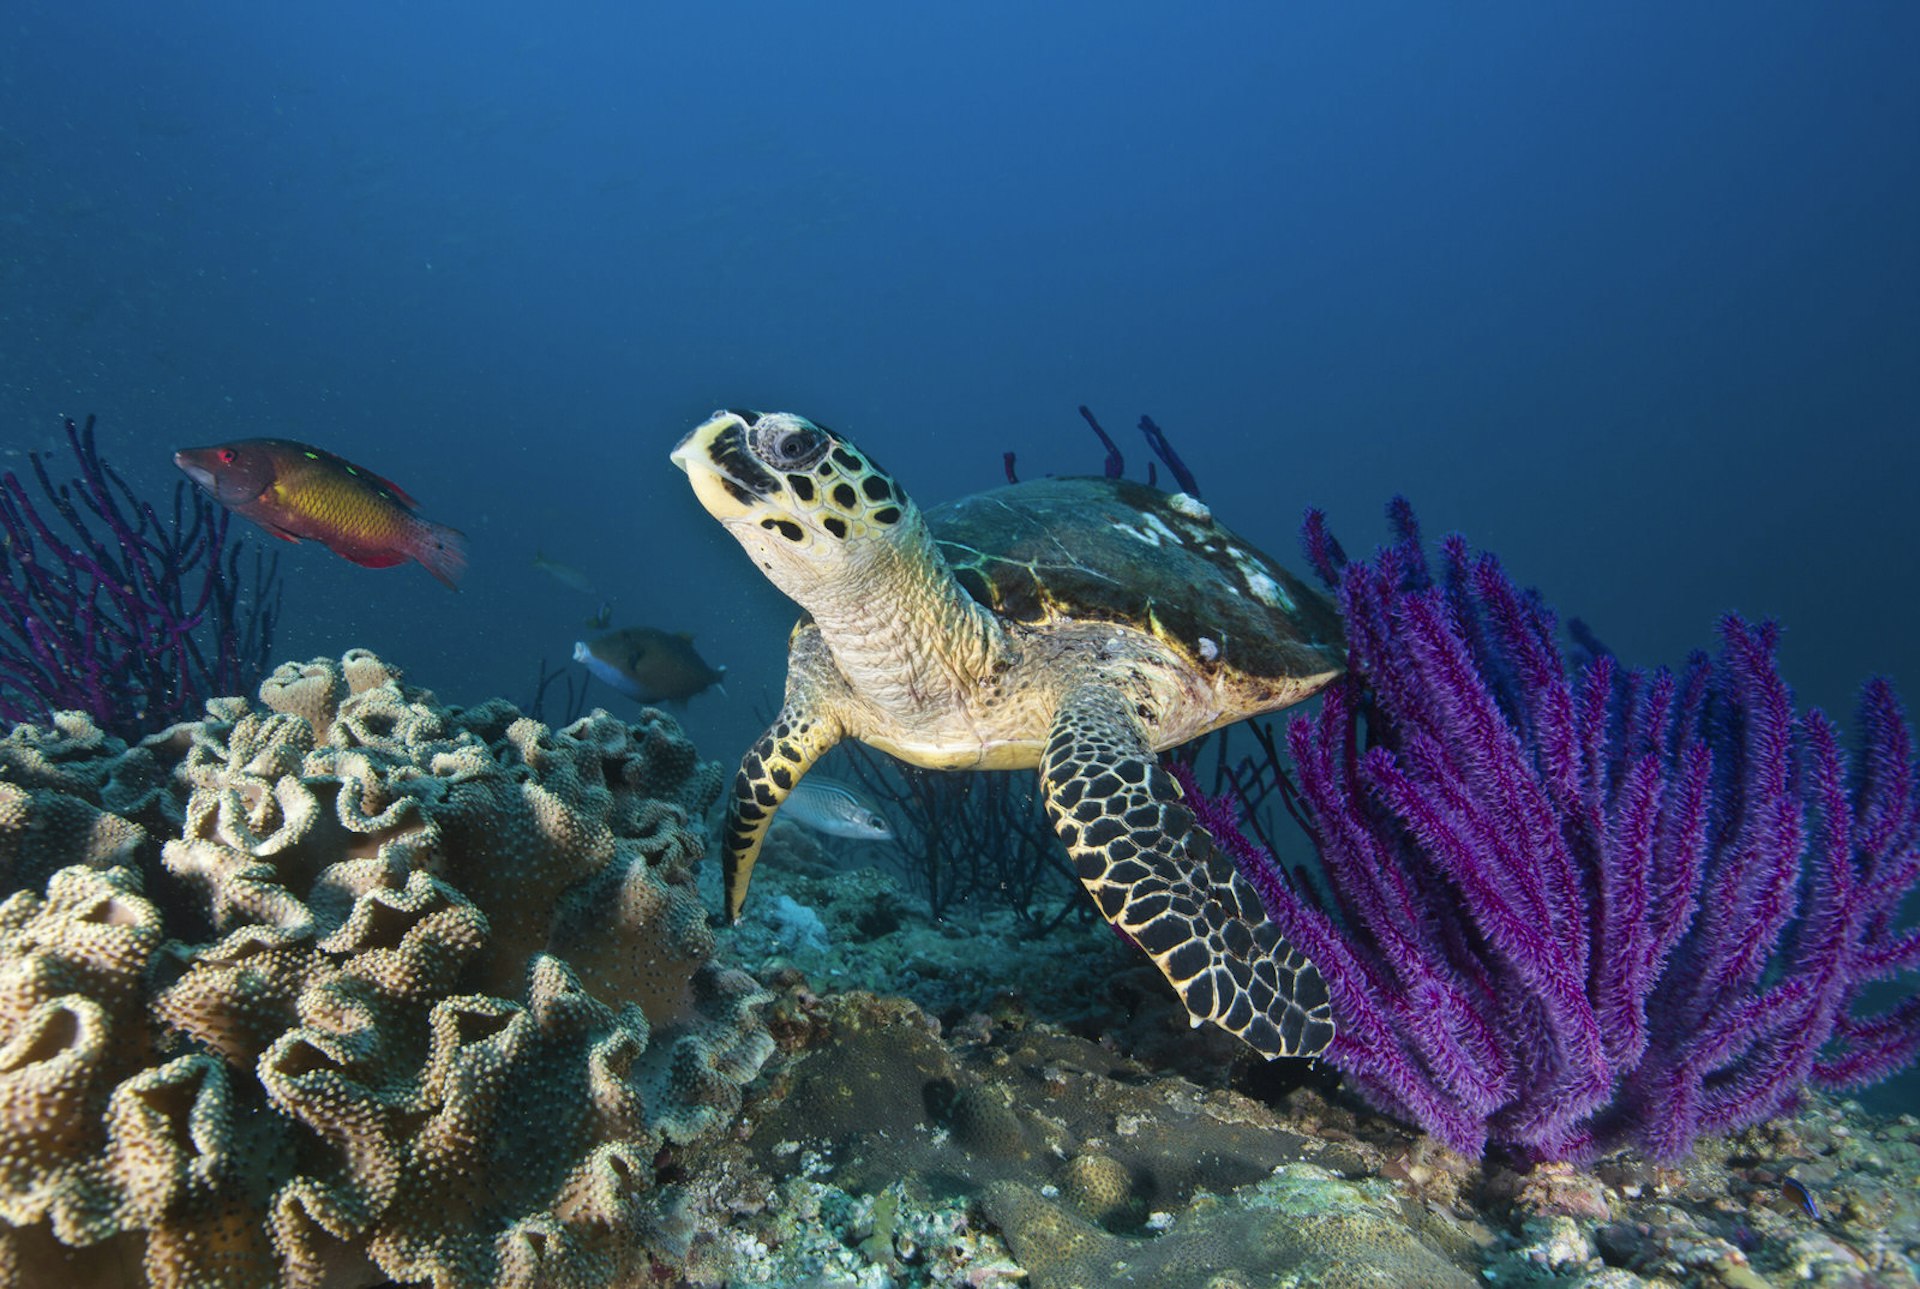 Hawksbill turtle swimming among purple whip coral off the Oman coast